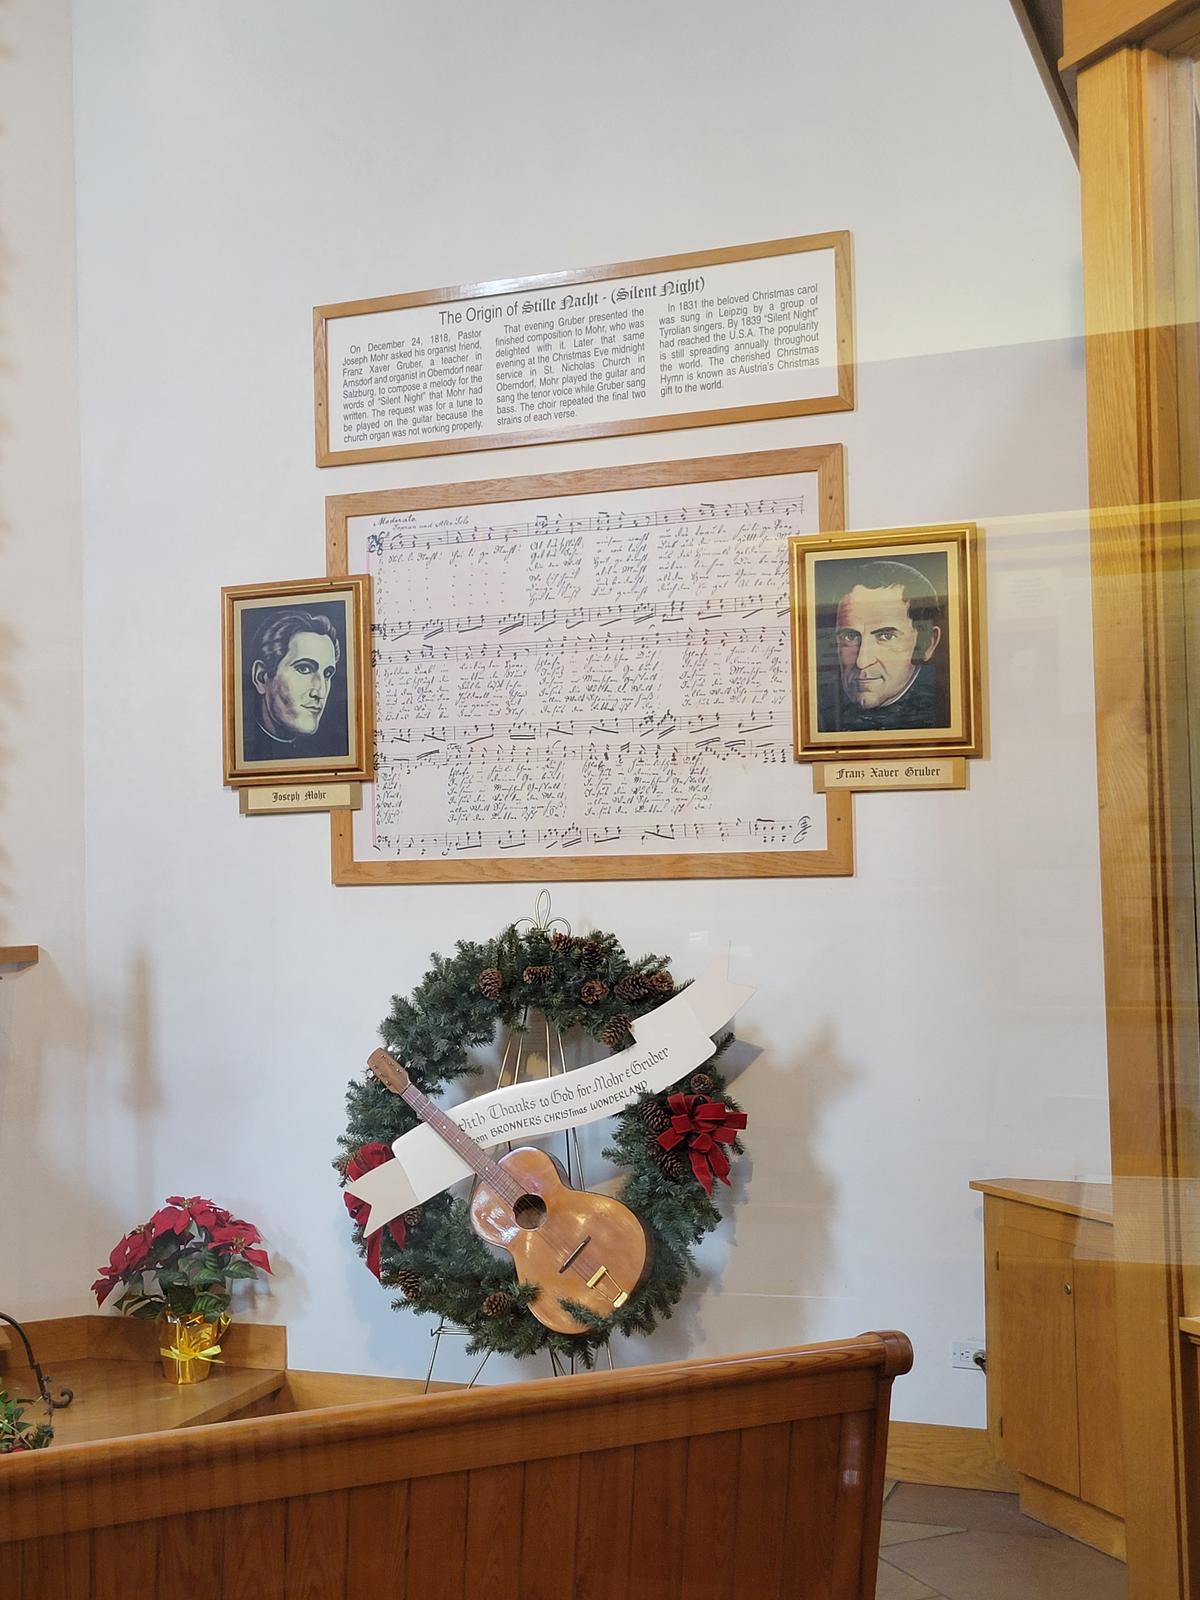 The chapel features a reproduction of the original musical score of "Silent Night." (Bronner's CHRISTmas Wonderland)